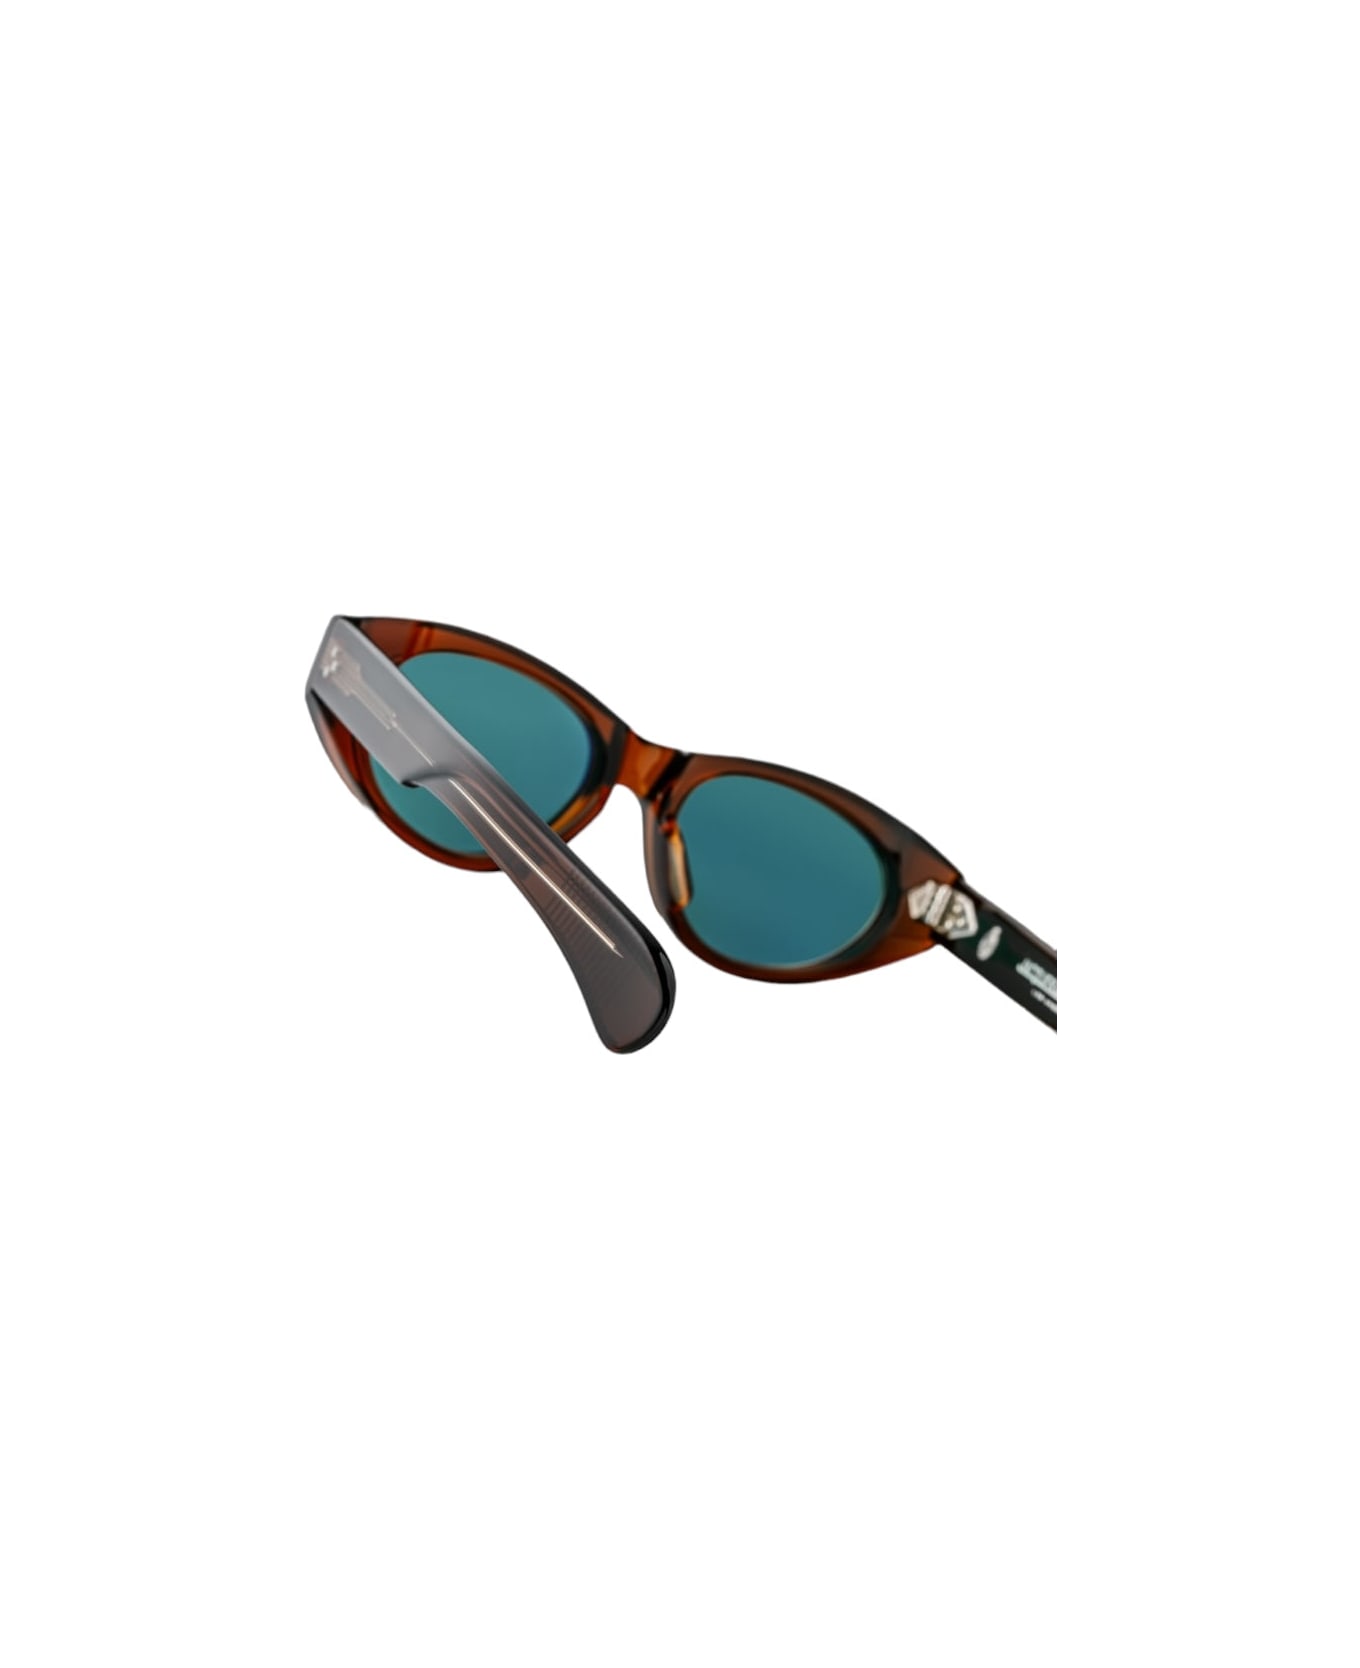 Jacques Marie Mage Krasner - Hickory Sunglasses